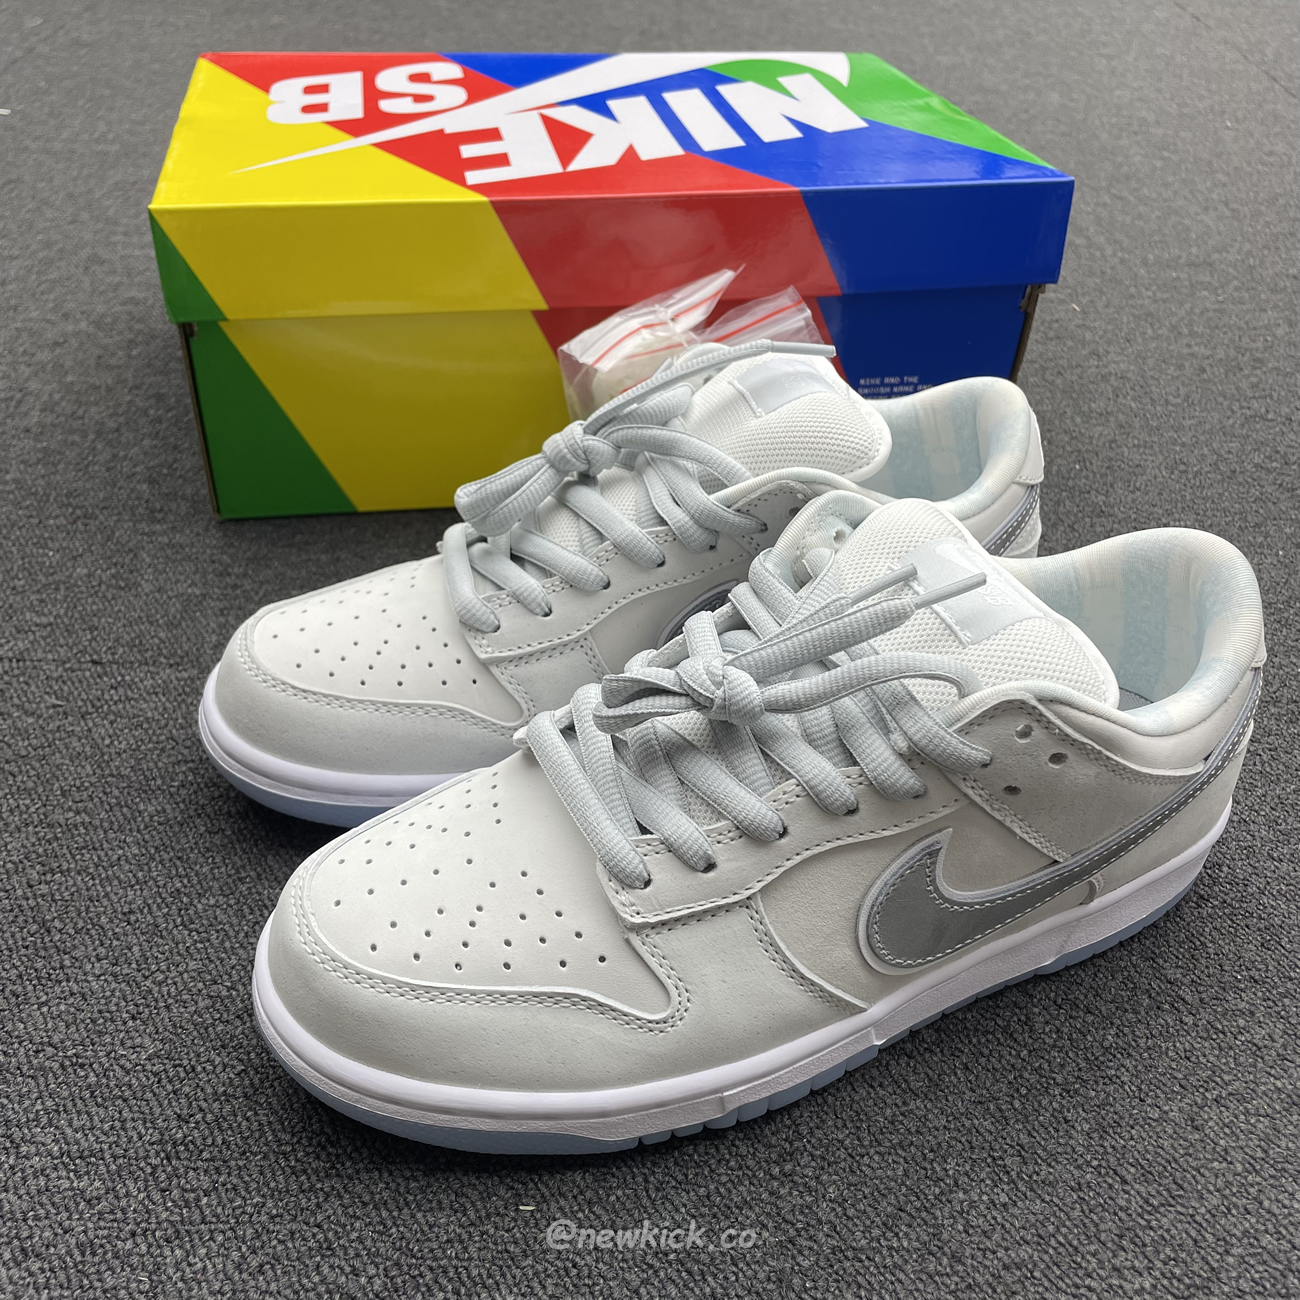 Nike Sb Dunk Low White Lobster Friends And Family Fd8776 100 (8) - newkick.org